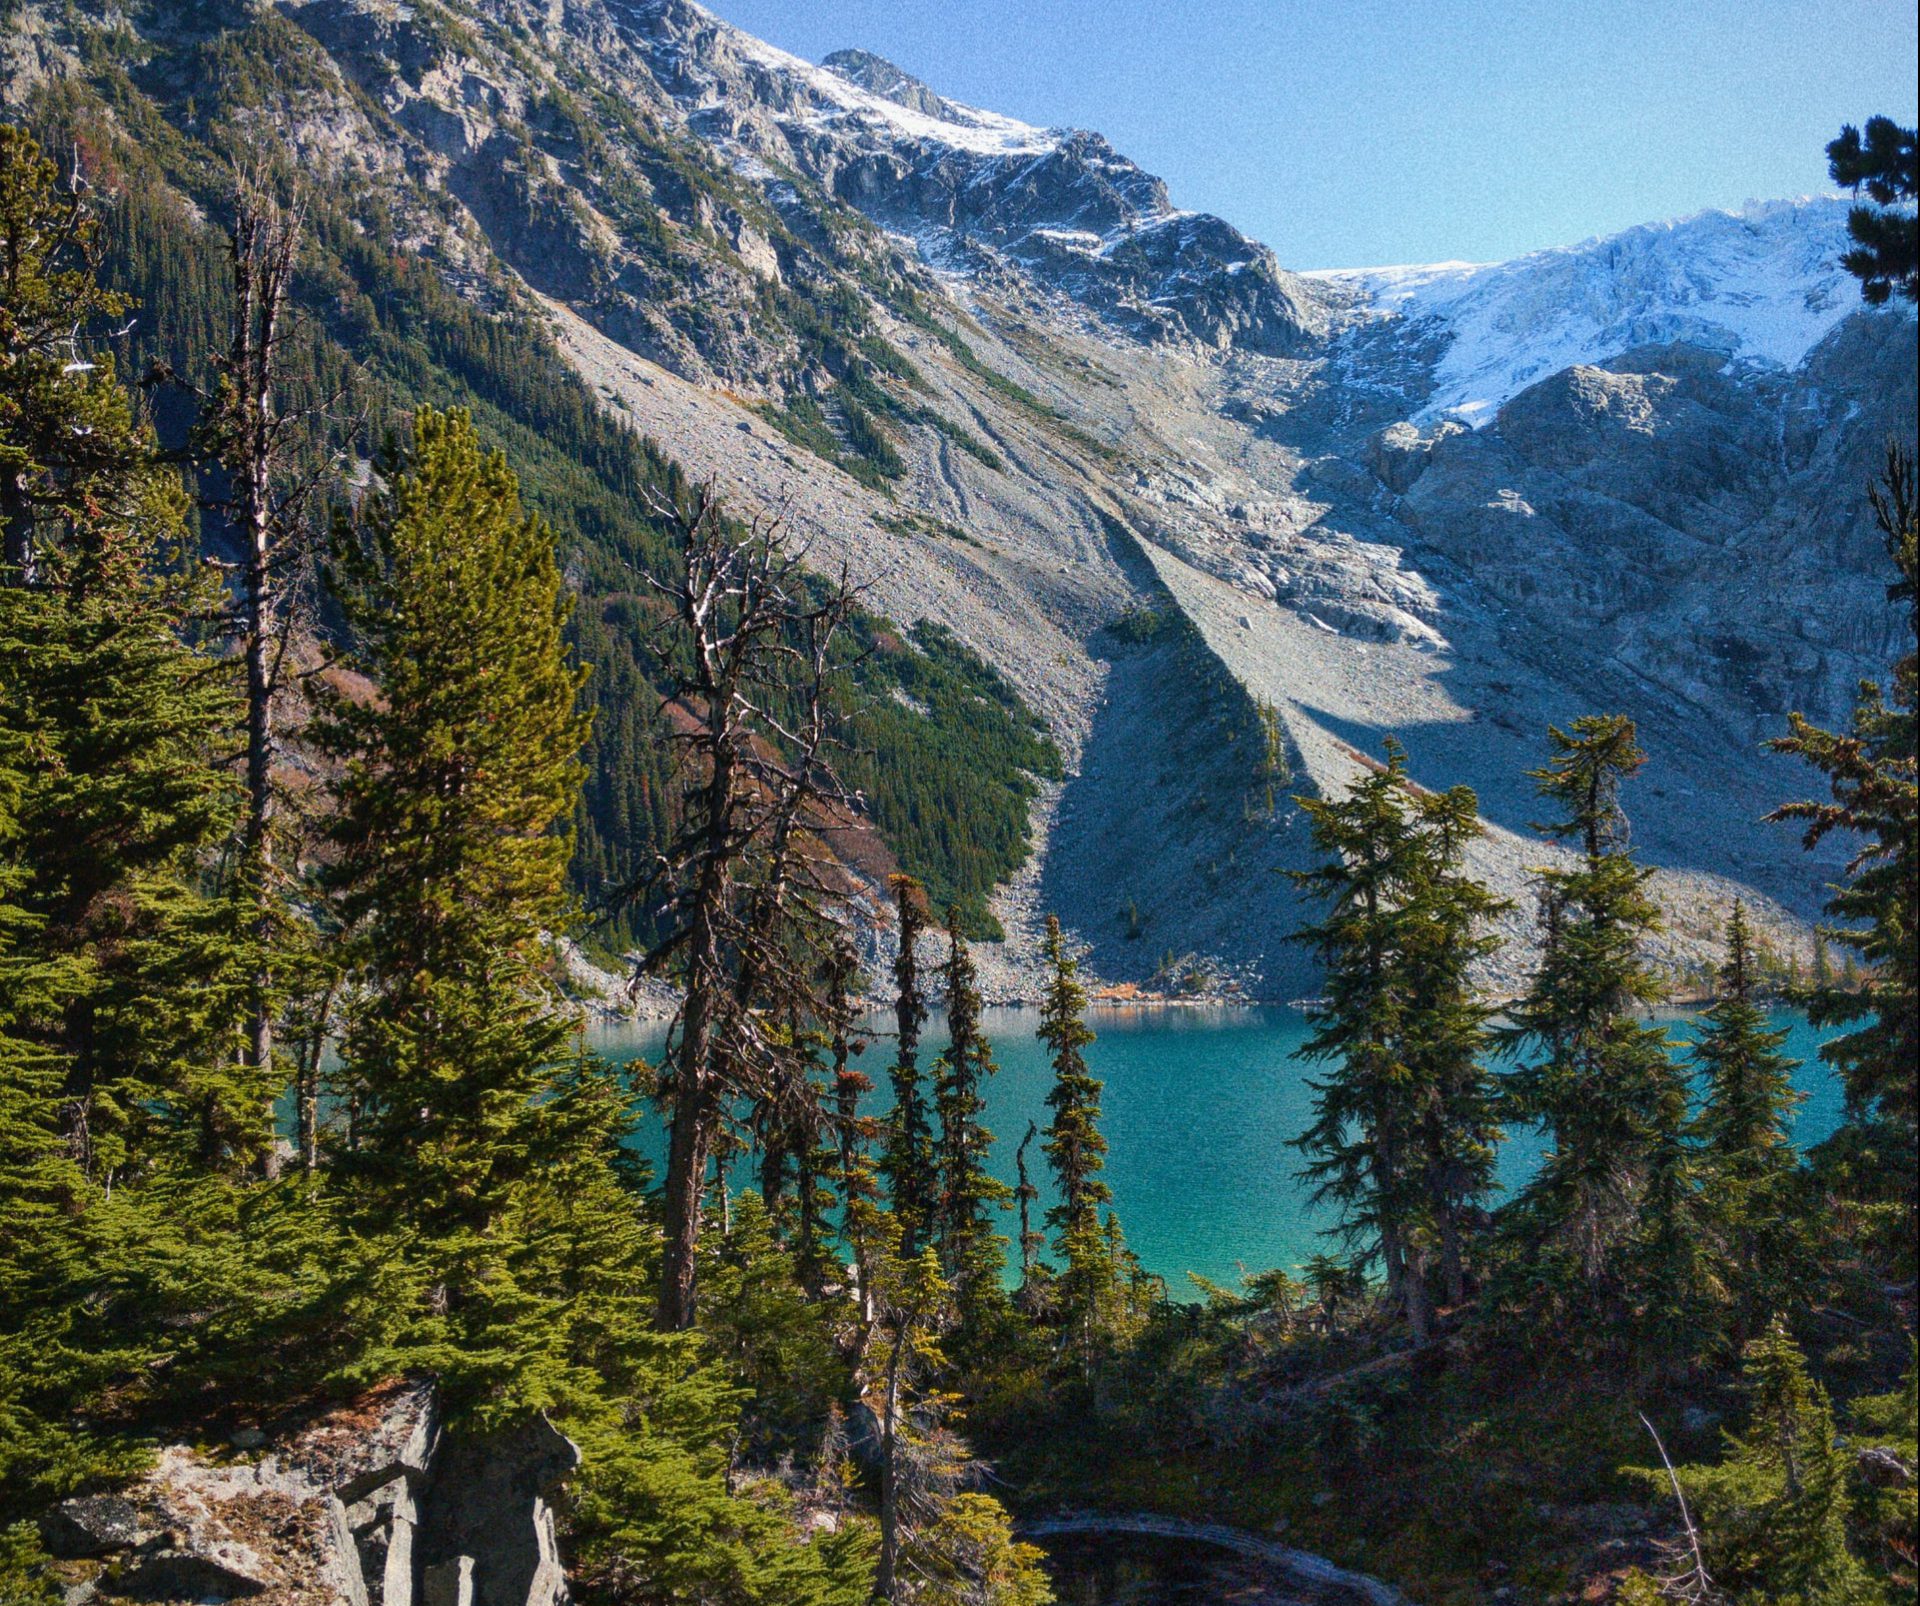 rocky mountains with blue-green lake and coniferous trees